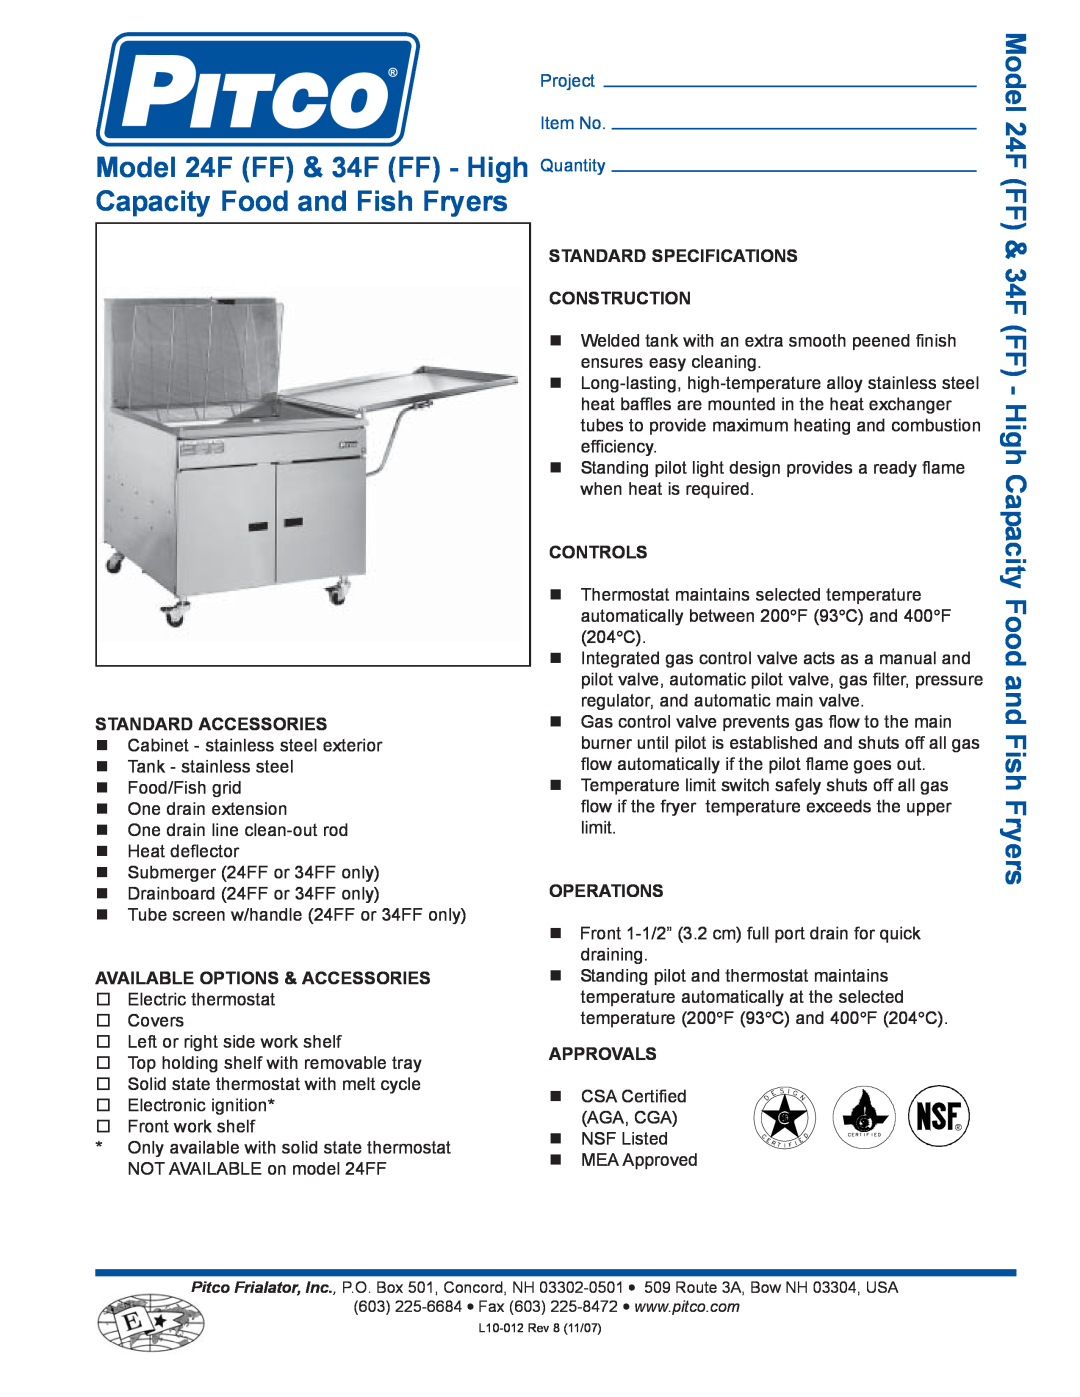 Pitco Frialator 34FF specifications Model 24F FF & 34F FF - High Quantity, Capacity Food and Fish Fryers, Project Item No 